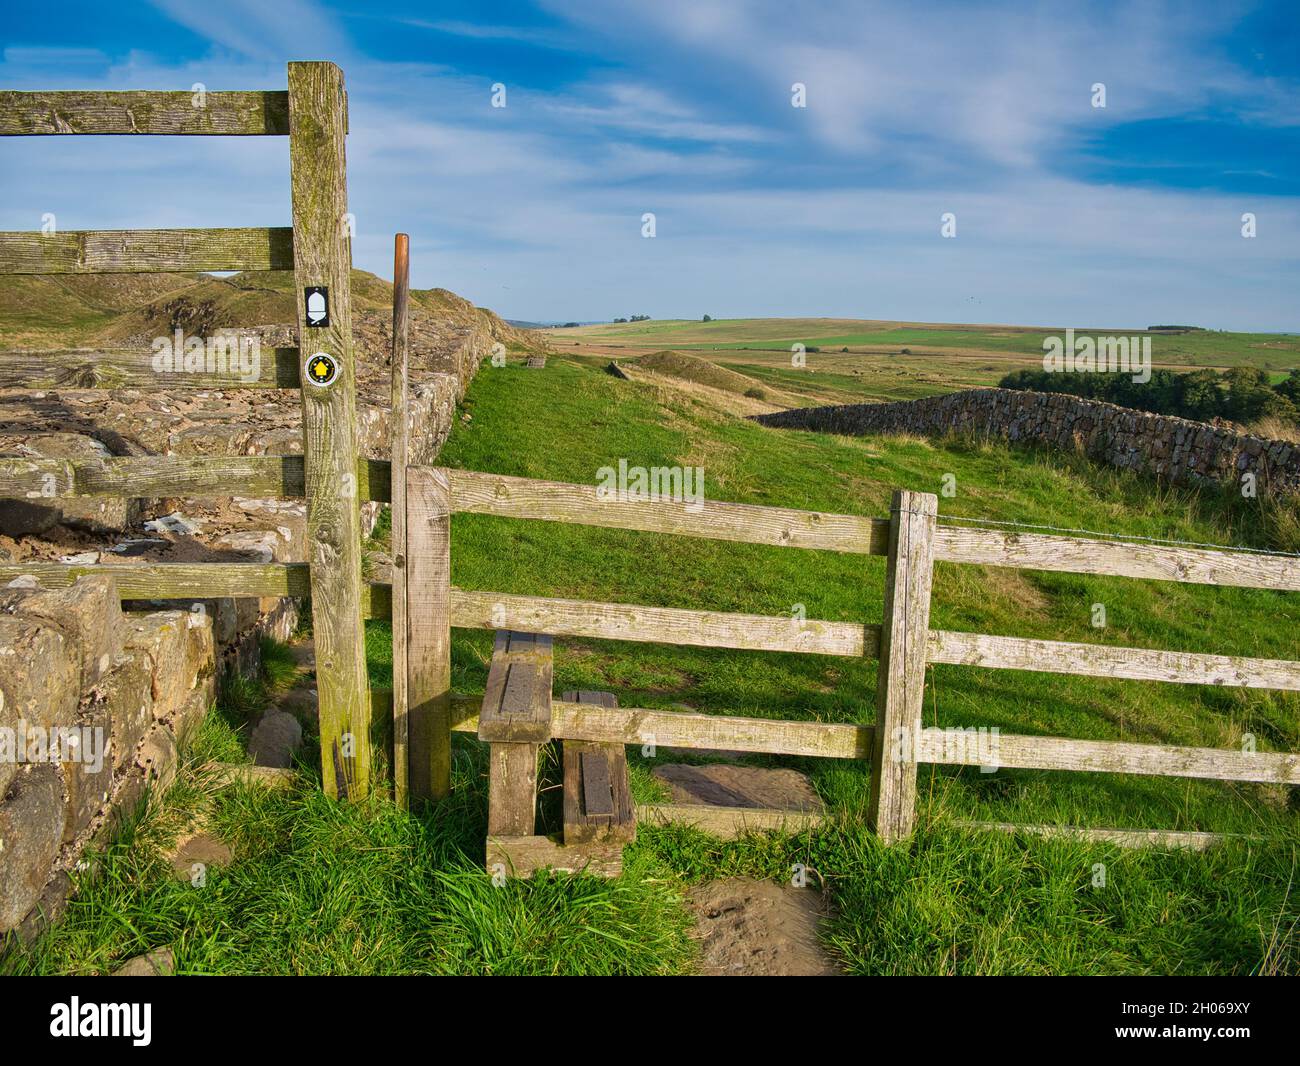 A wooden step stile with signs crosses a fence between two fields on the Hadrian's Wall Path in Northumberland, England, UK. Taken on a sunny day with Stock Photo